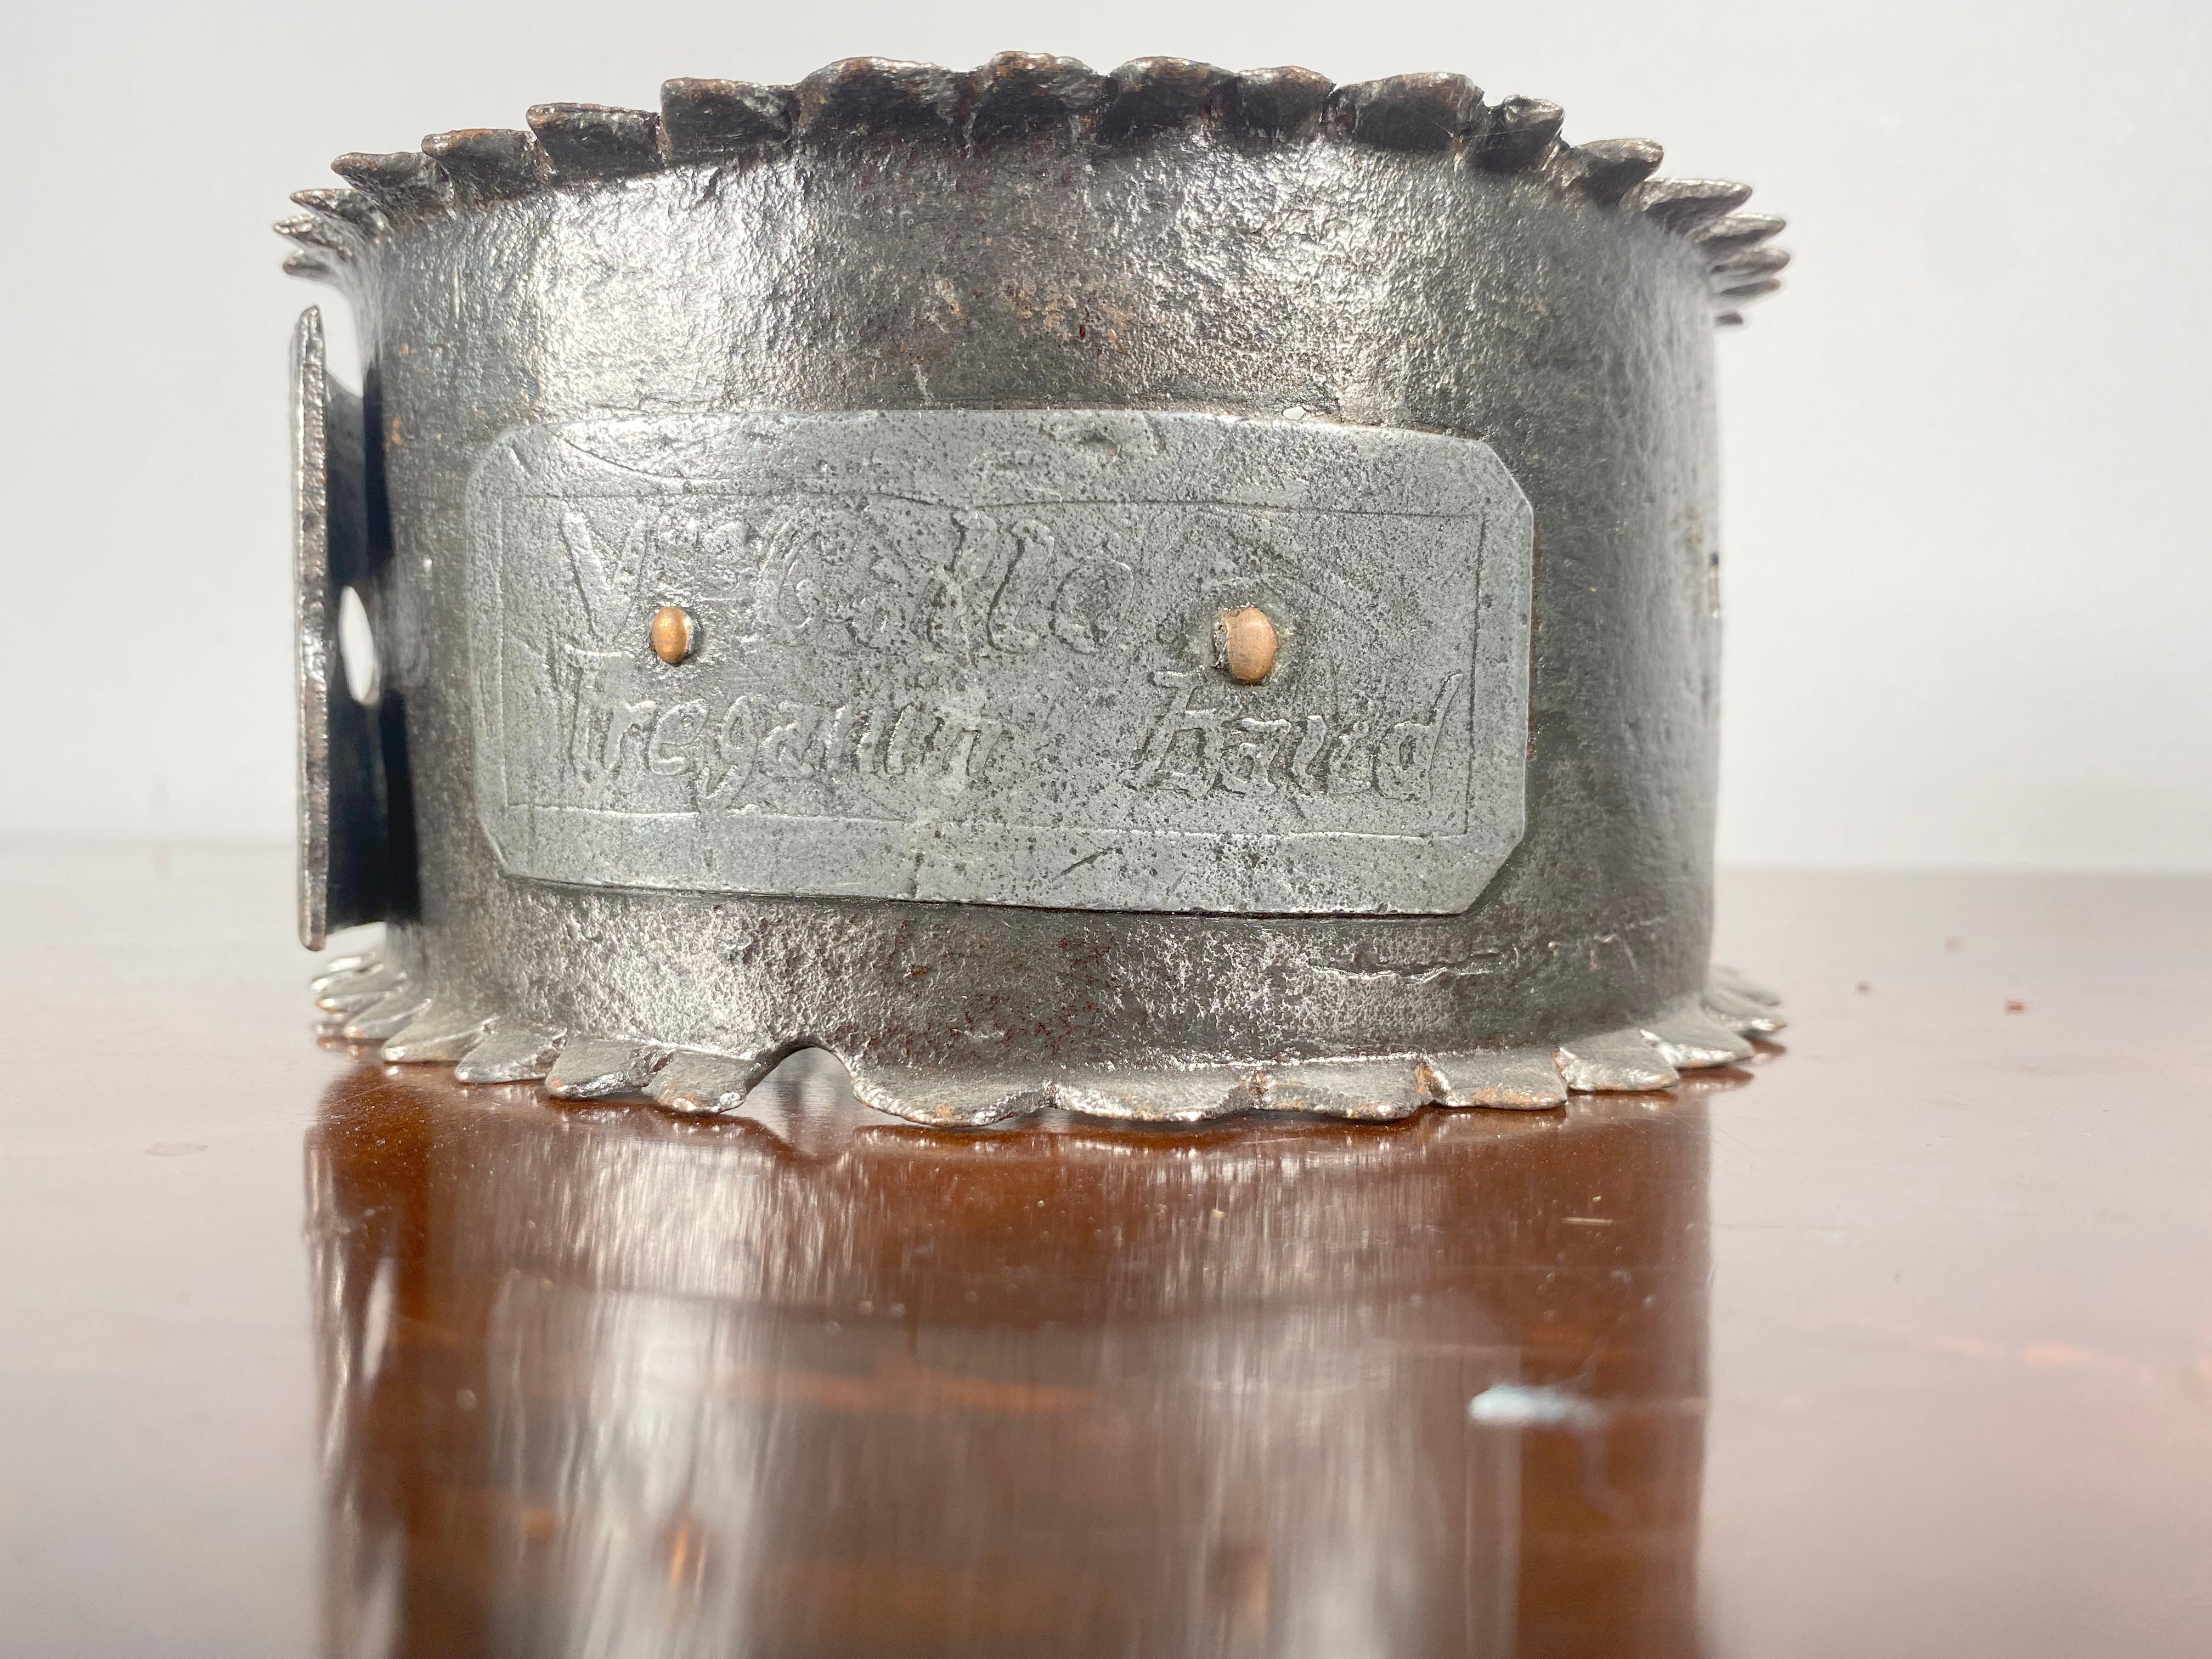 A very rare and particularly good example of an early 19th Century Pewter Hunting Dog Collar 

Circa 1810-20 made from pewter with serated edge around the whole collar. This was designed to protect the dog's neck from predators whilst out